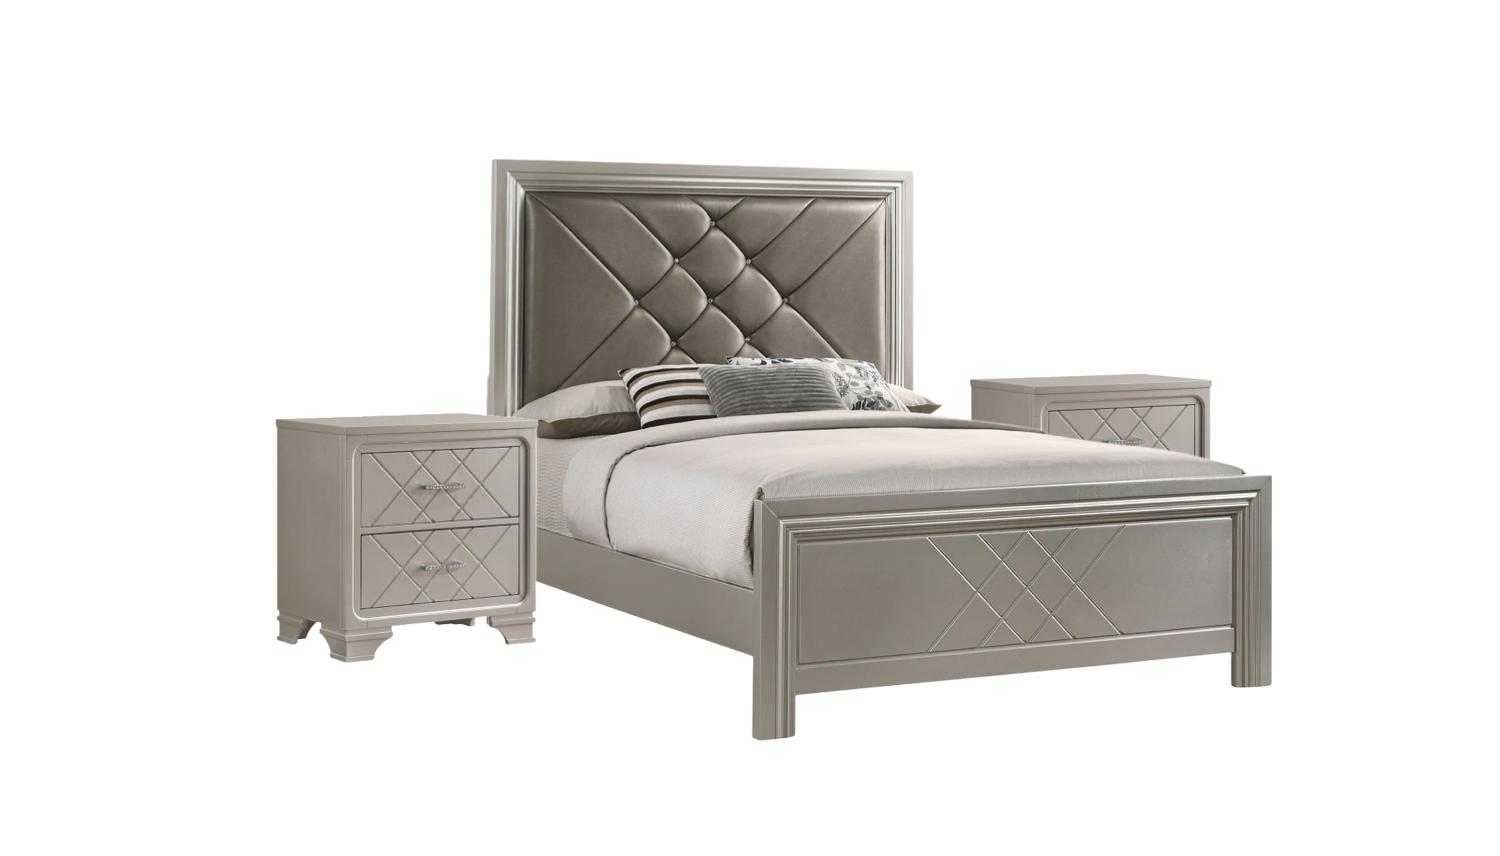 Modern Panel Bedroom Set Phoebe B6970-Q-Bed-3pcs in Silver, Champagne PU